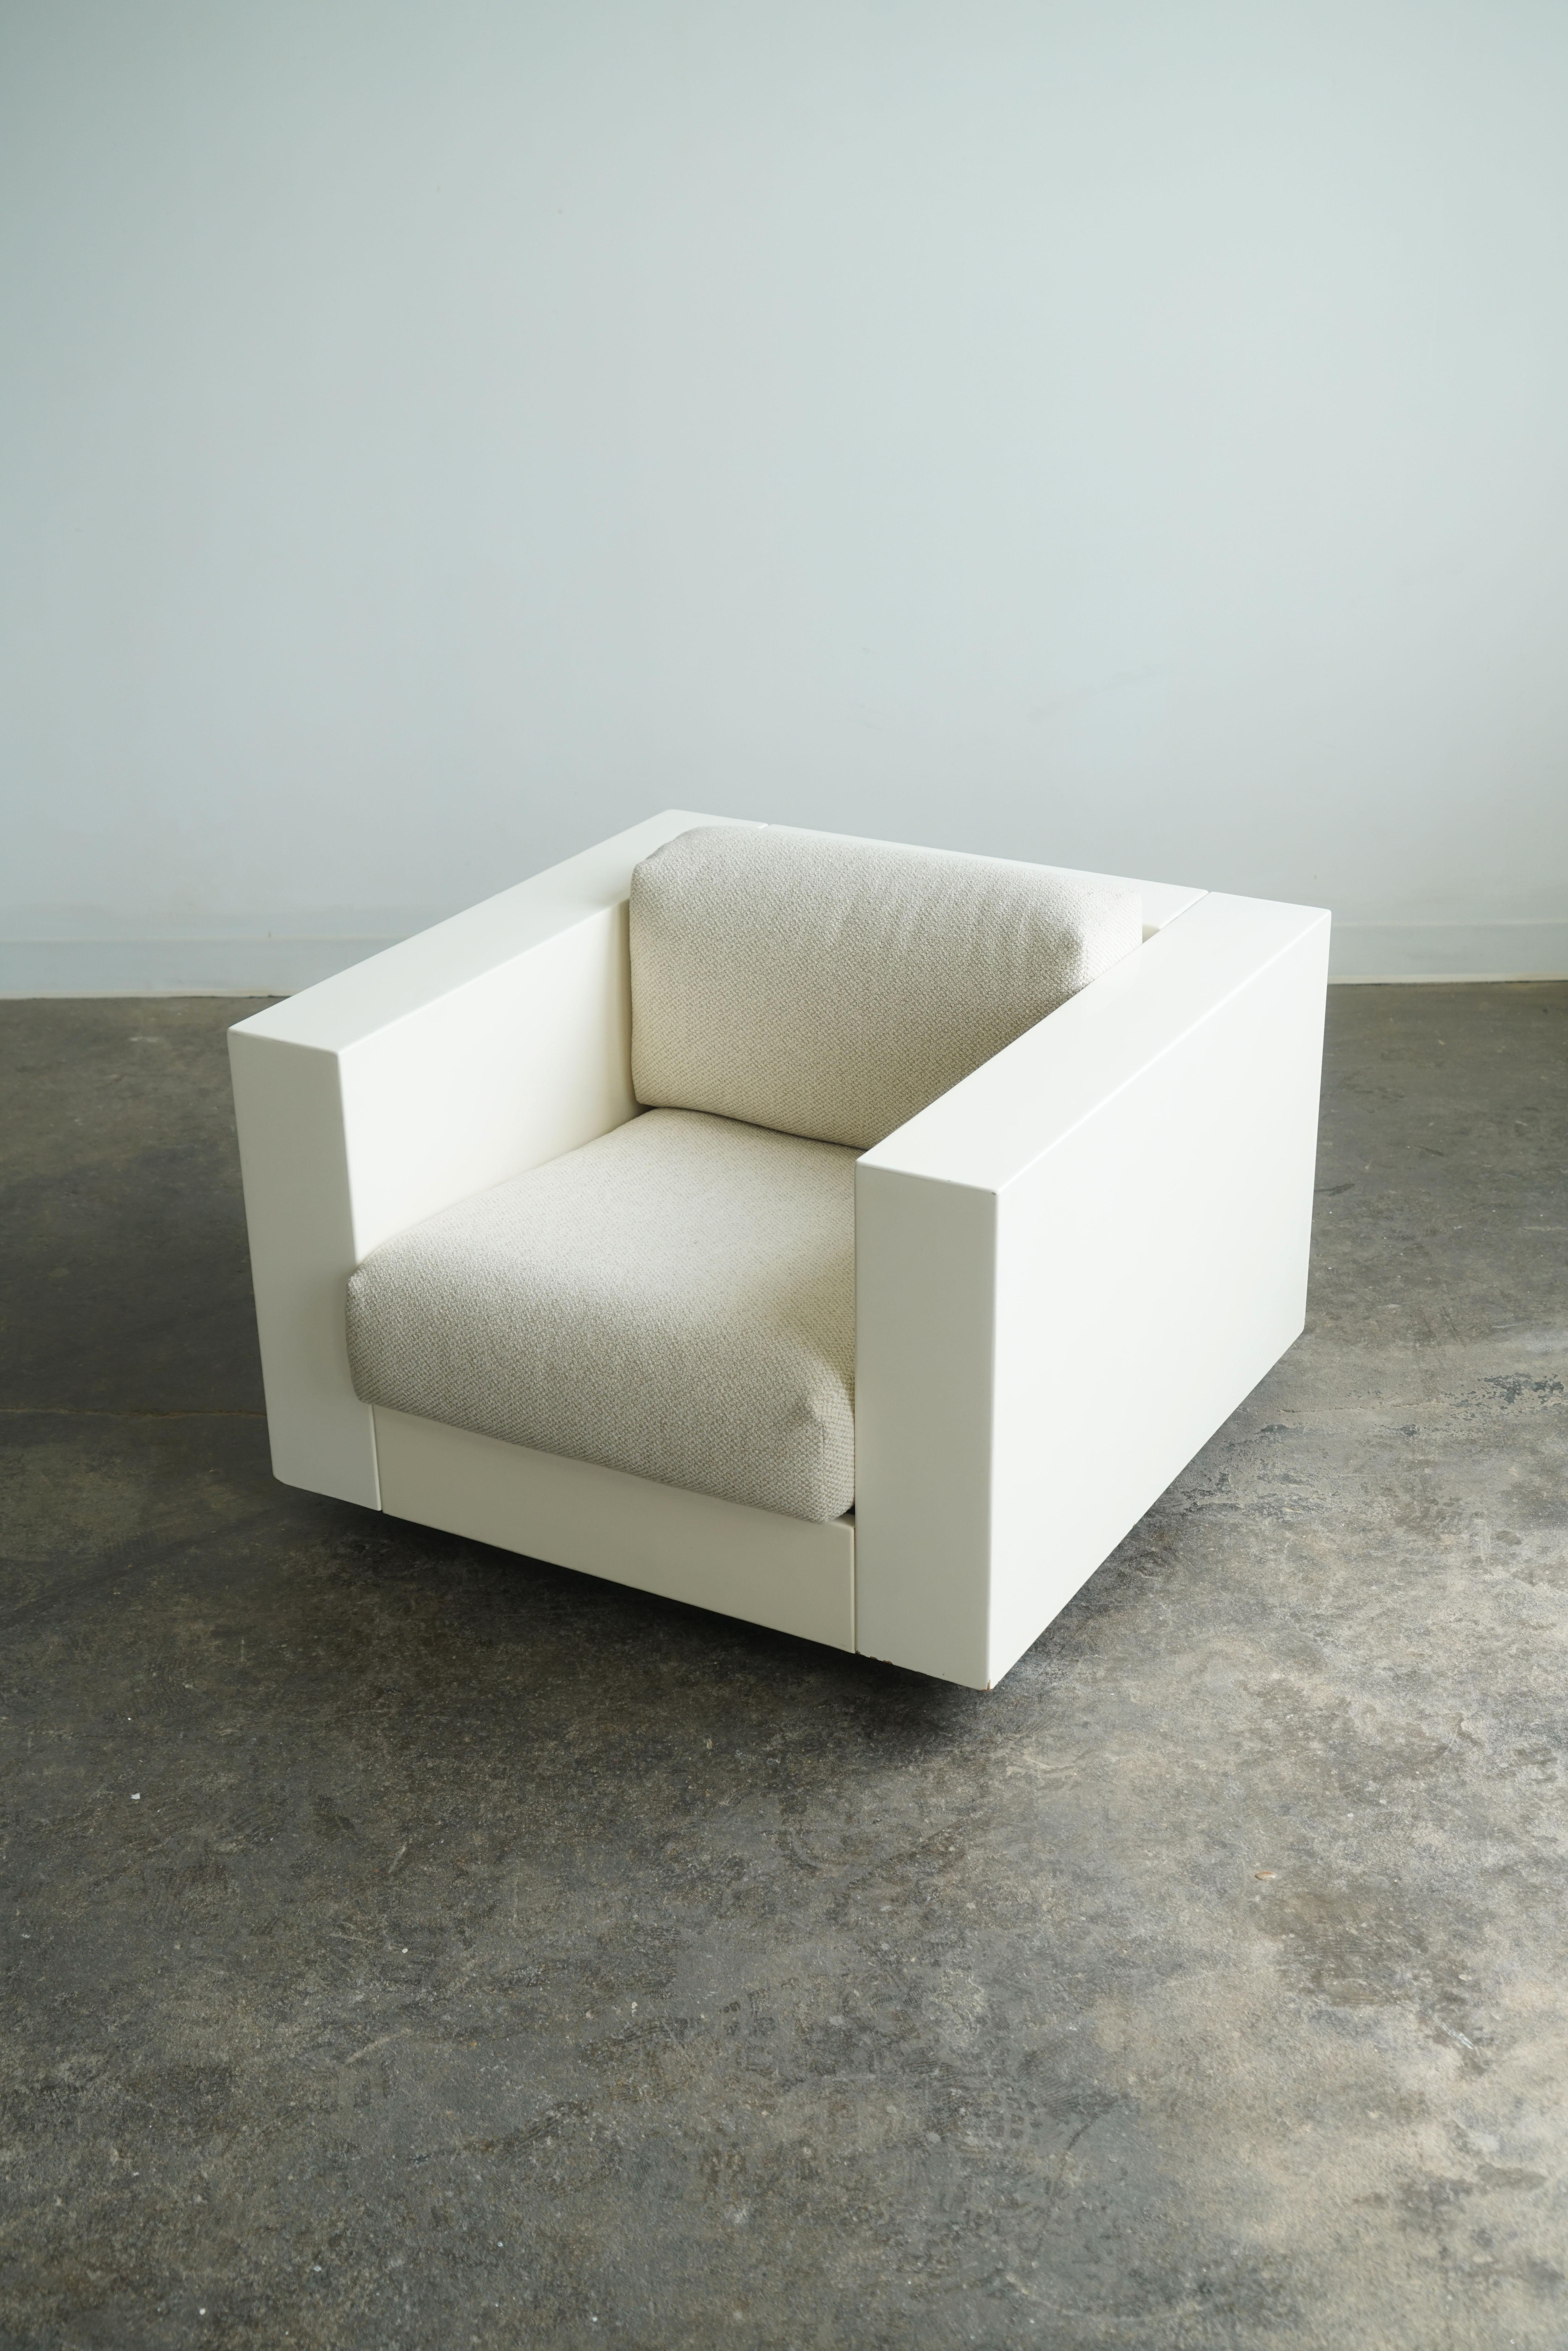 Saratoga Chair by Massimo and Lella Vignelli for Poltronova.
Italy, 1960's
White lacquered wood frame.
Reupholstered in April 2024 in an off-white Knoll 